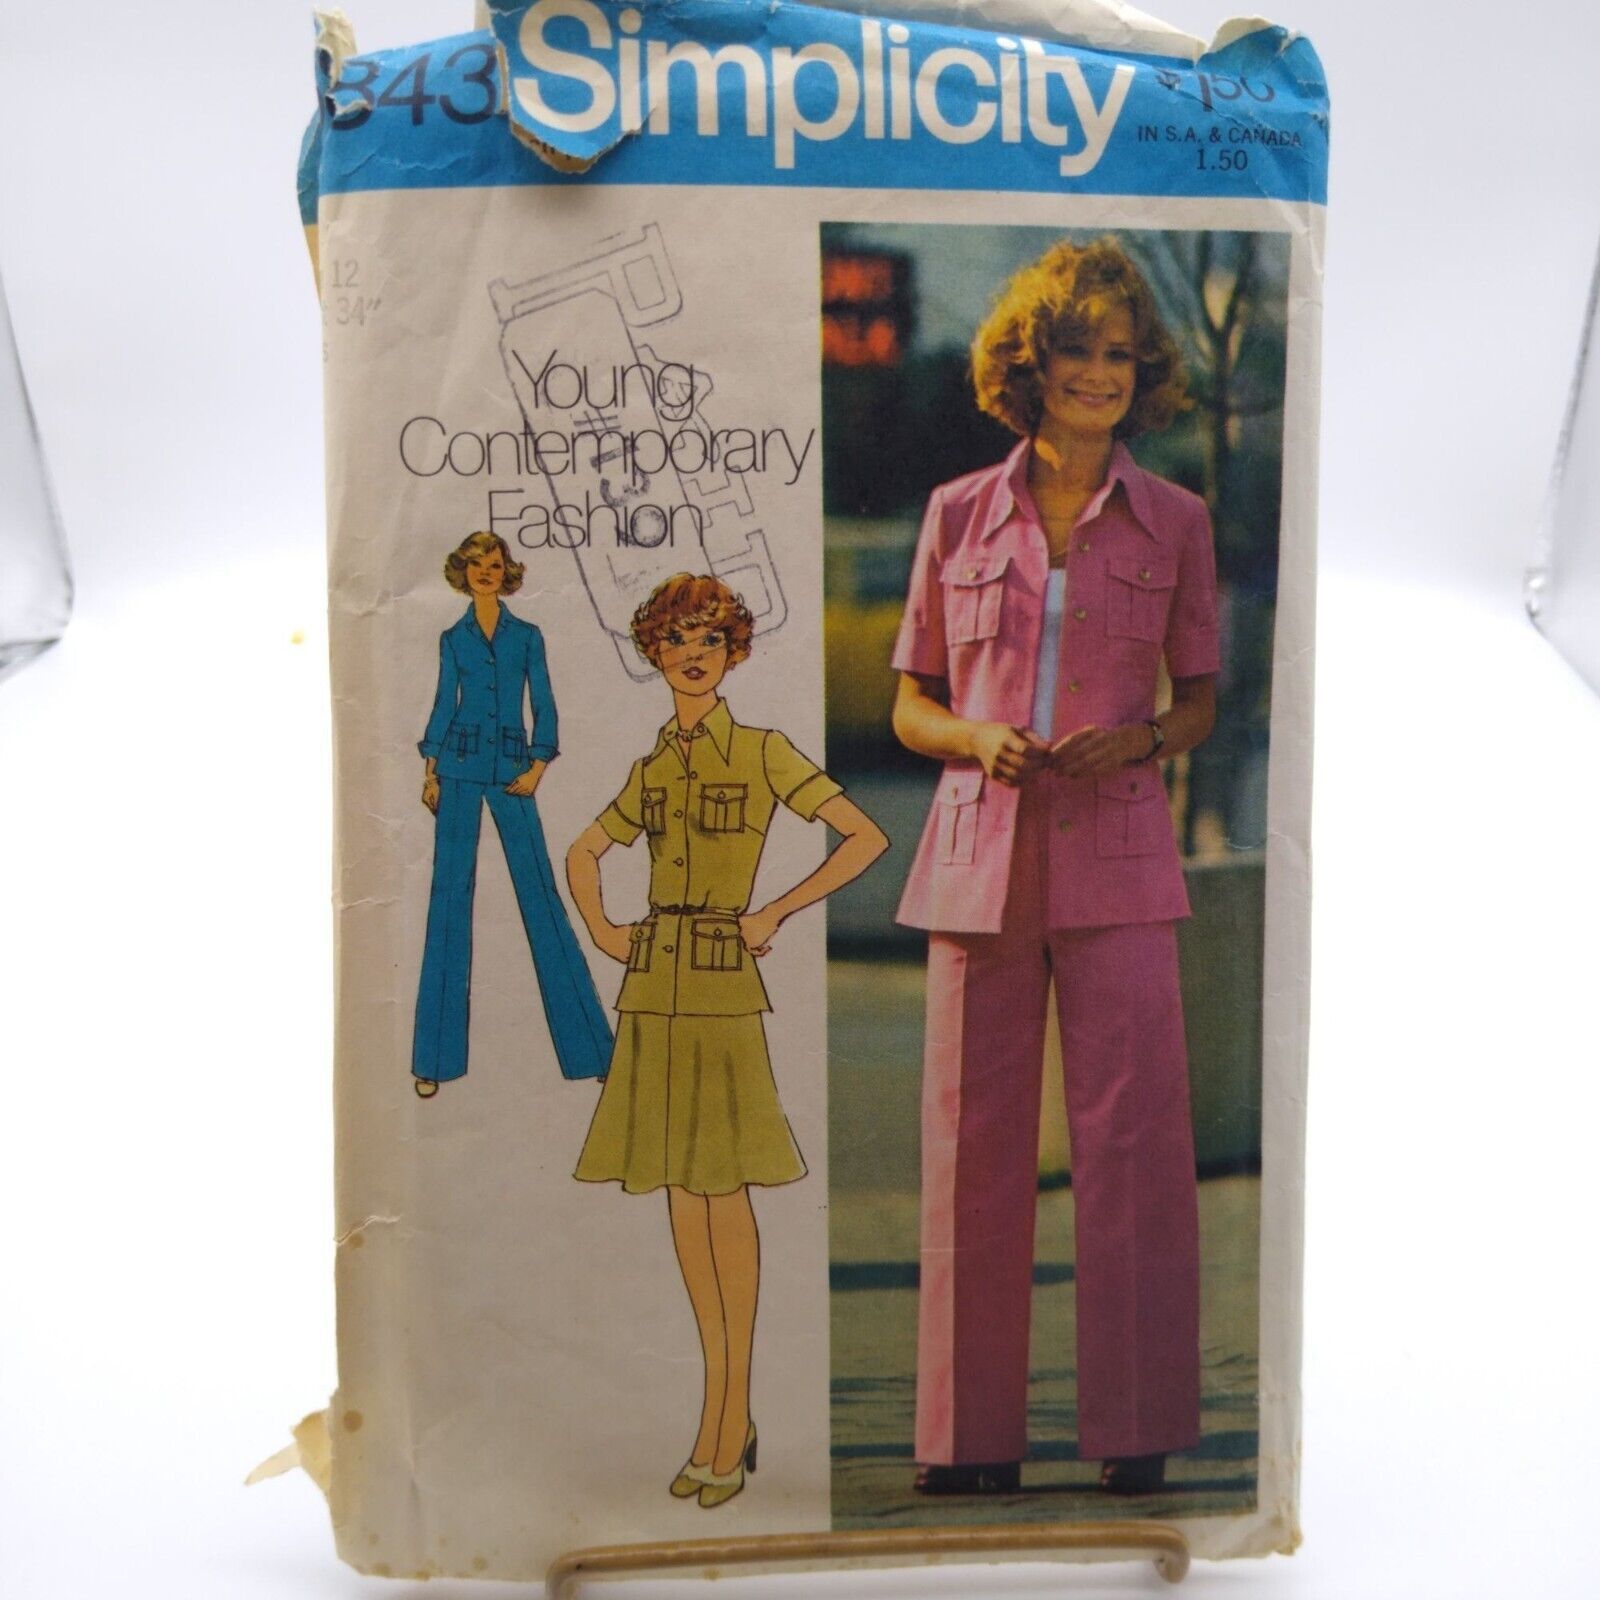 Vintage Sewing PATTERN Simplicity 6843, Young Contemporary Fashion, Misses 1975 - $17.42